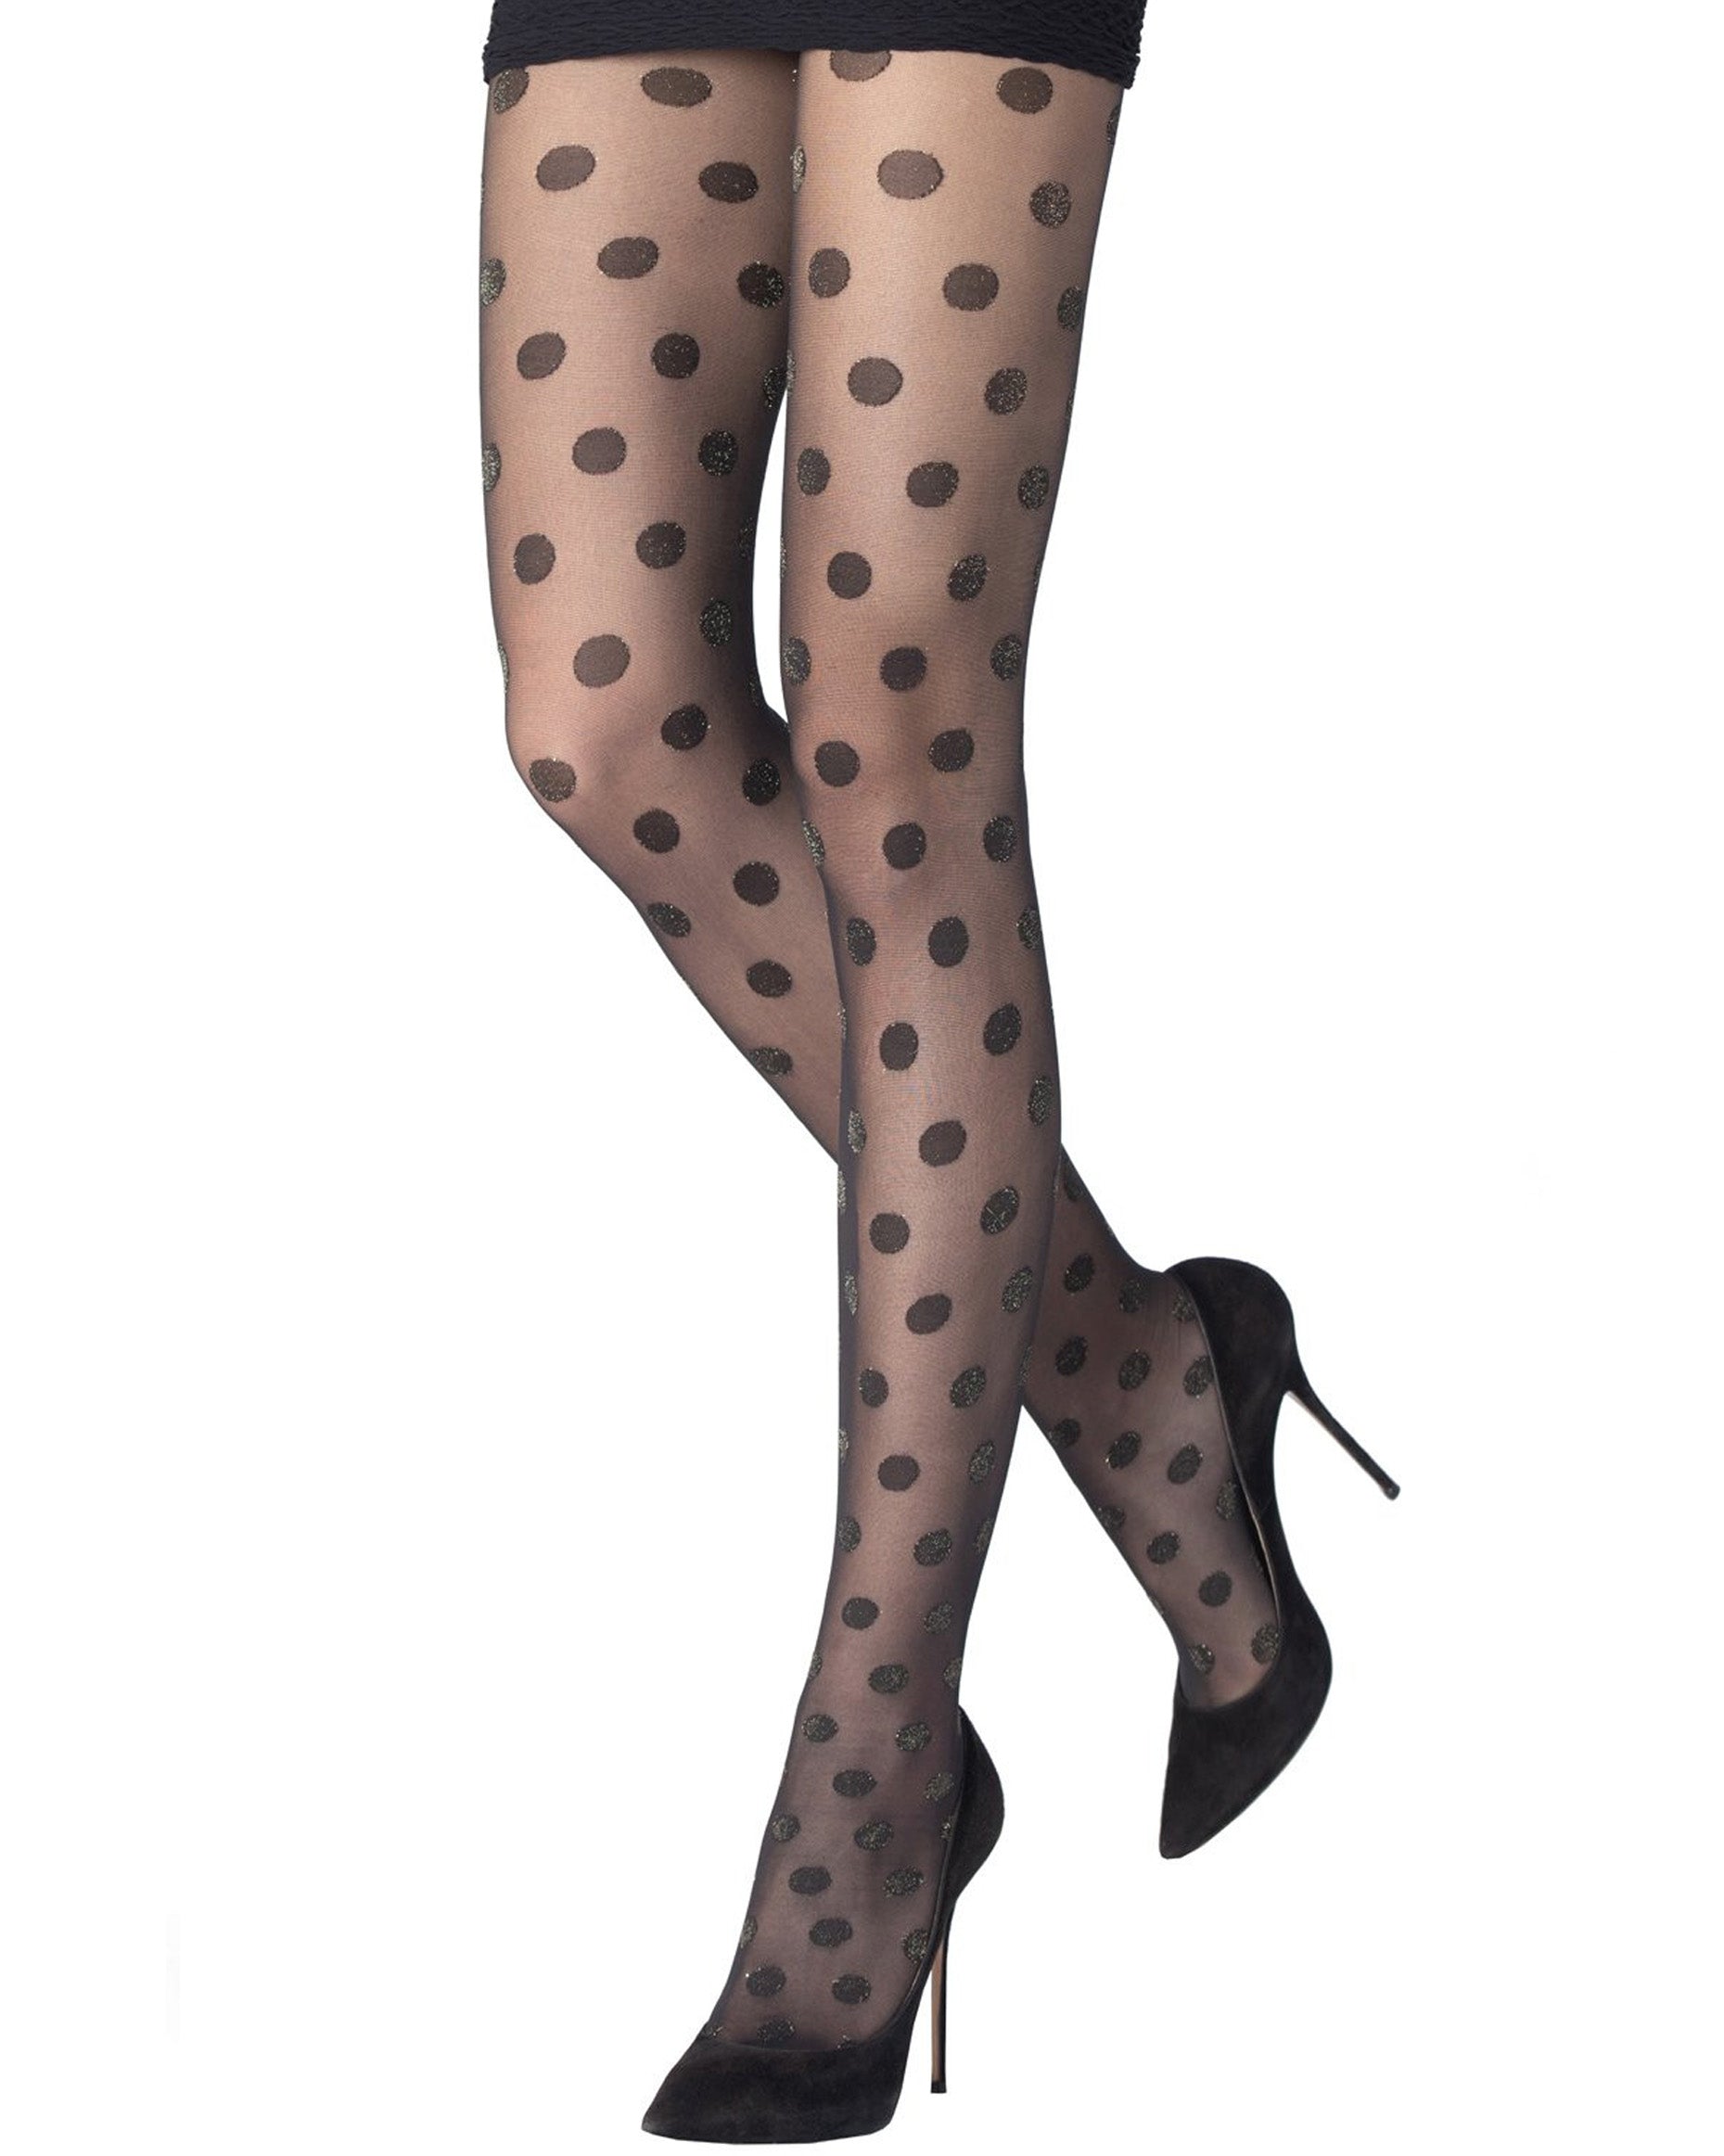 Emilio Cavallini Metallized Polka Dot Tights - Sheer black spot patterned tights with gold sparkly lamé, boxer brief, flat seams, gussets and reinforced toe.